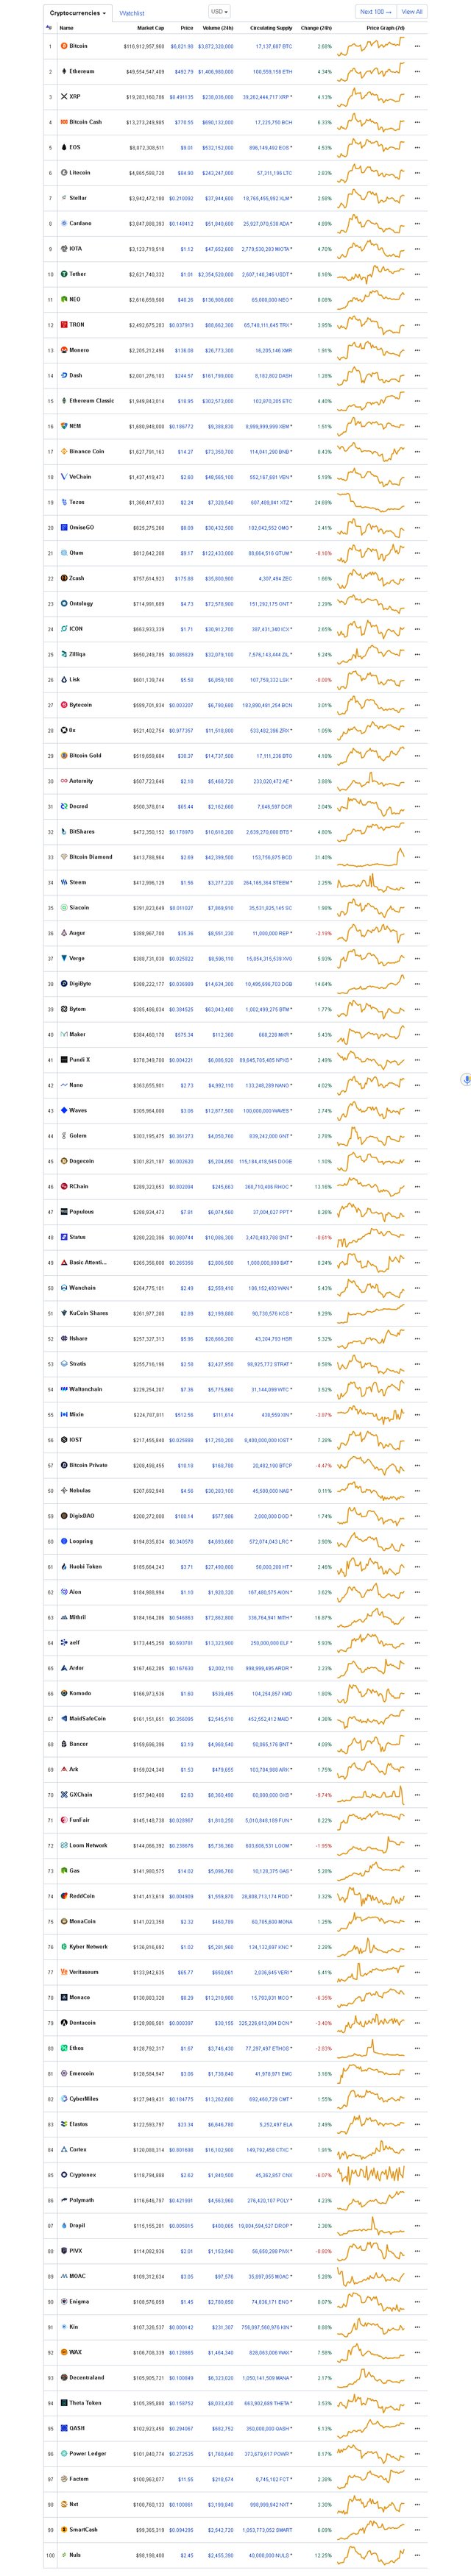 Current situation of Crypto currencies 2018-07-08-15_38_15.jpg